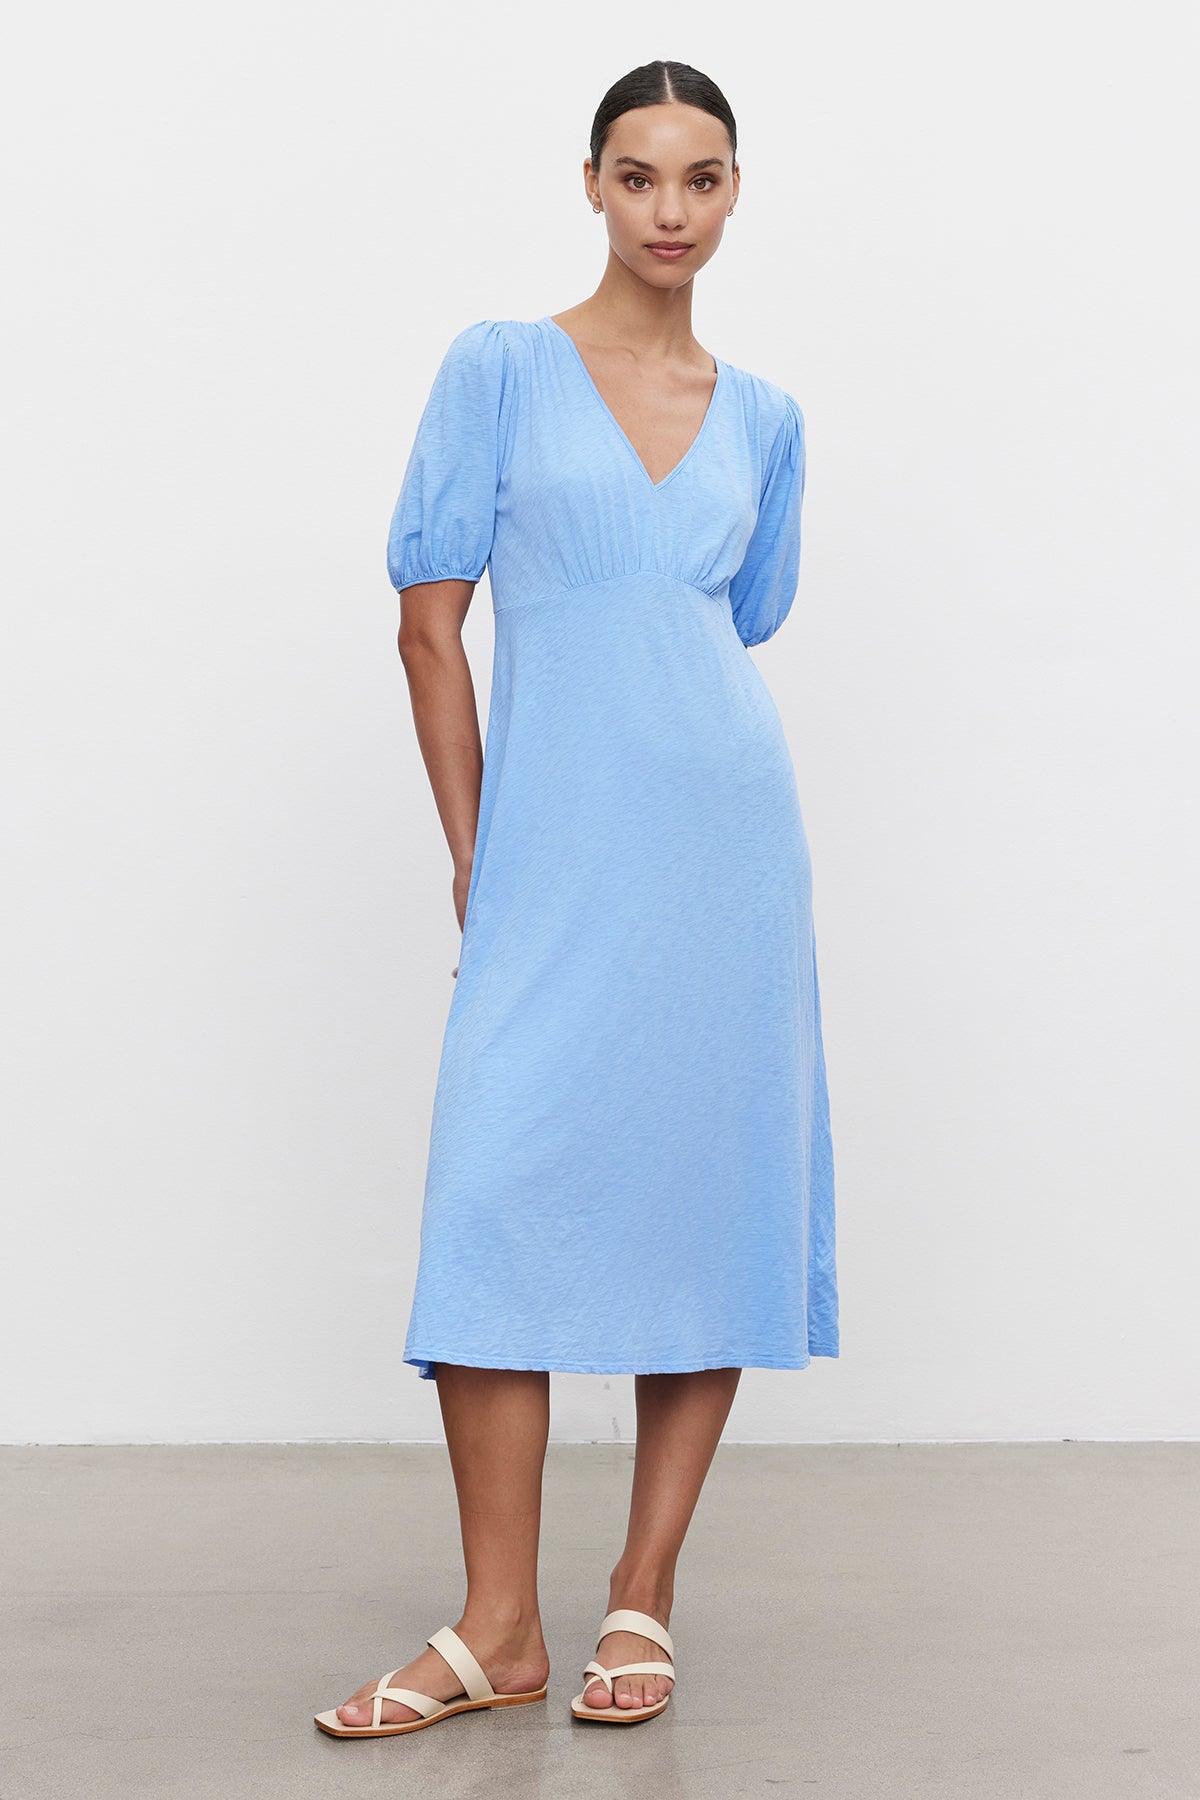   A woman in a Velvet by Graham & Spencer PARKER COTTON SLUB MIDI DRESS with puff sleeves and a v-neckline, paired with white sandals, stands against a white background. 